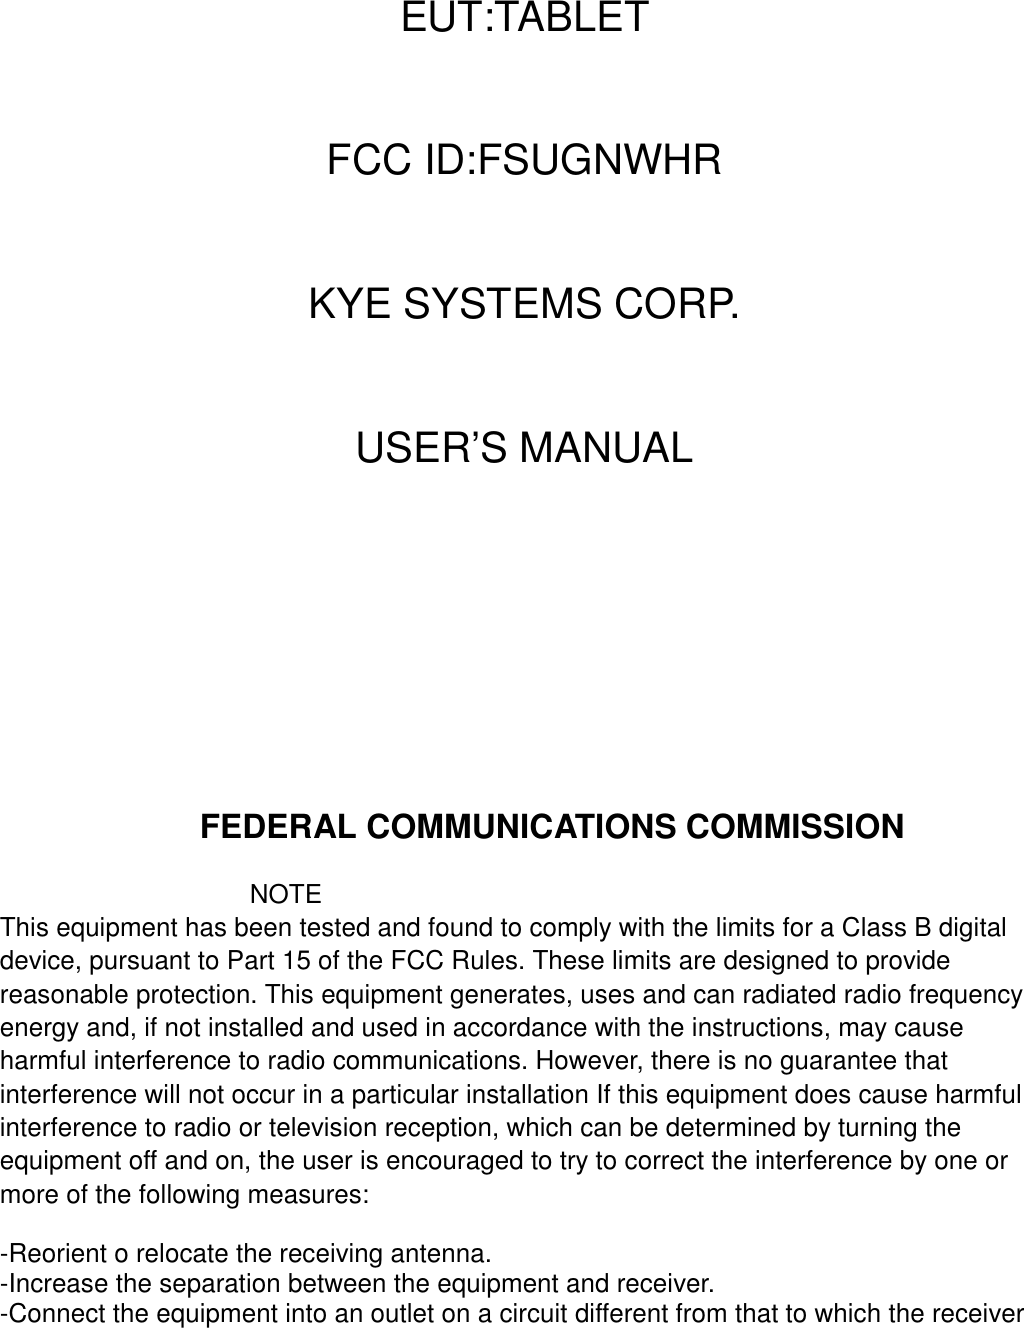 EUT:TABLETFCC ID:FSUGNWHRKYE SYSTEMS CORP.USER’S MANUALFEDERAL COMMUNICATIONS COMMISSIONNOTEThis equipment has been tested and found to comply with the limits for a Class B digitaldevice, pursuant to Part 15 of the FCC Rules. These limits are designed to providereasonable protection. This equipment generates, uses and can radiated radio frequencyenergy and, if not installed and used in accordance with the instructions, may causeharmful interference to radio communications. However, there is no guarantee thatinterference will not occur in a particular installation If this equipment does cause harmfulinterference to radio or television reception, which can be determined by turning theequipment off and on, the user is encouraged to try to correct the interference by one ormore of the following measures:-Reorient o relocate the receiving antenna.-Increase the separation between the equipment and receiver.-Connect the equipment into an outlet on a circuit different from that to which the receiver